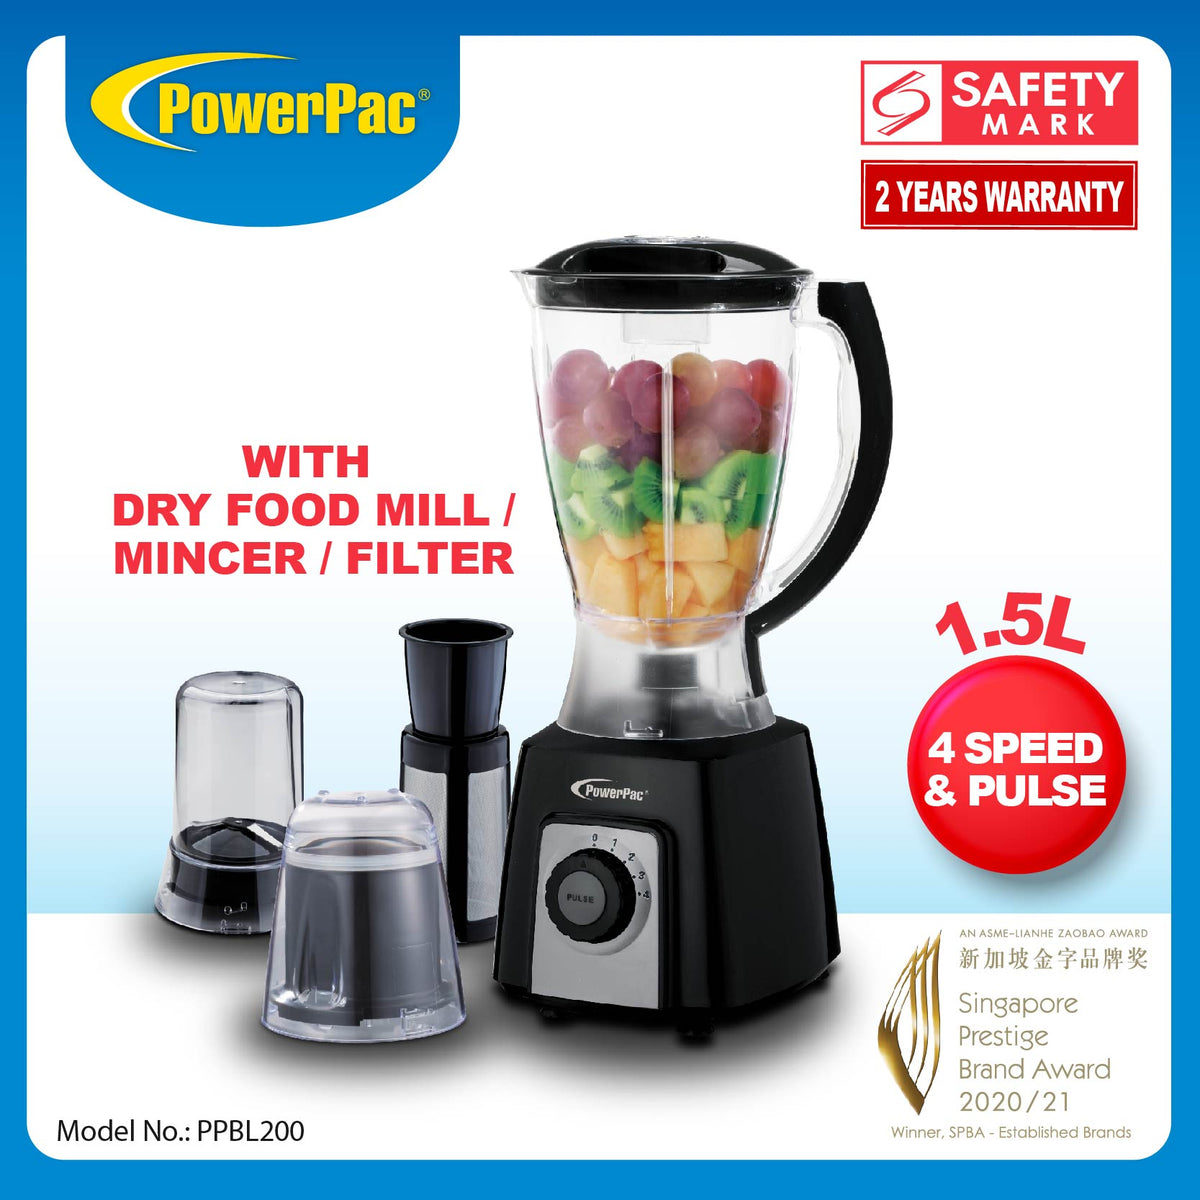 4in1 Blender with Dry Food Mill, Mincer and Filter (PPBL200)